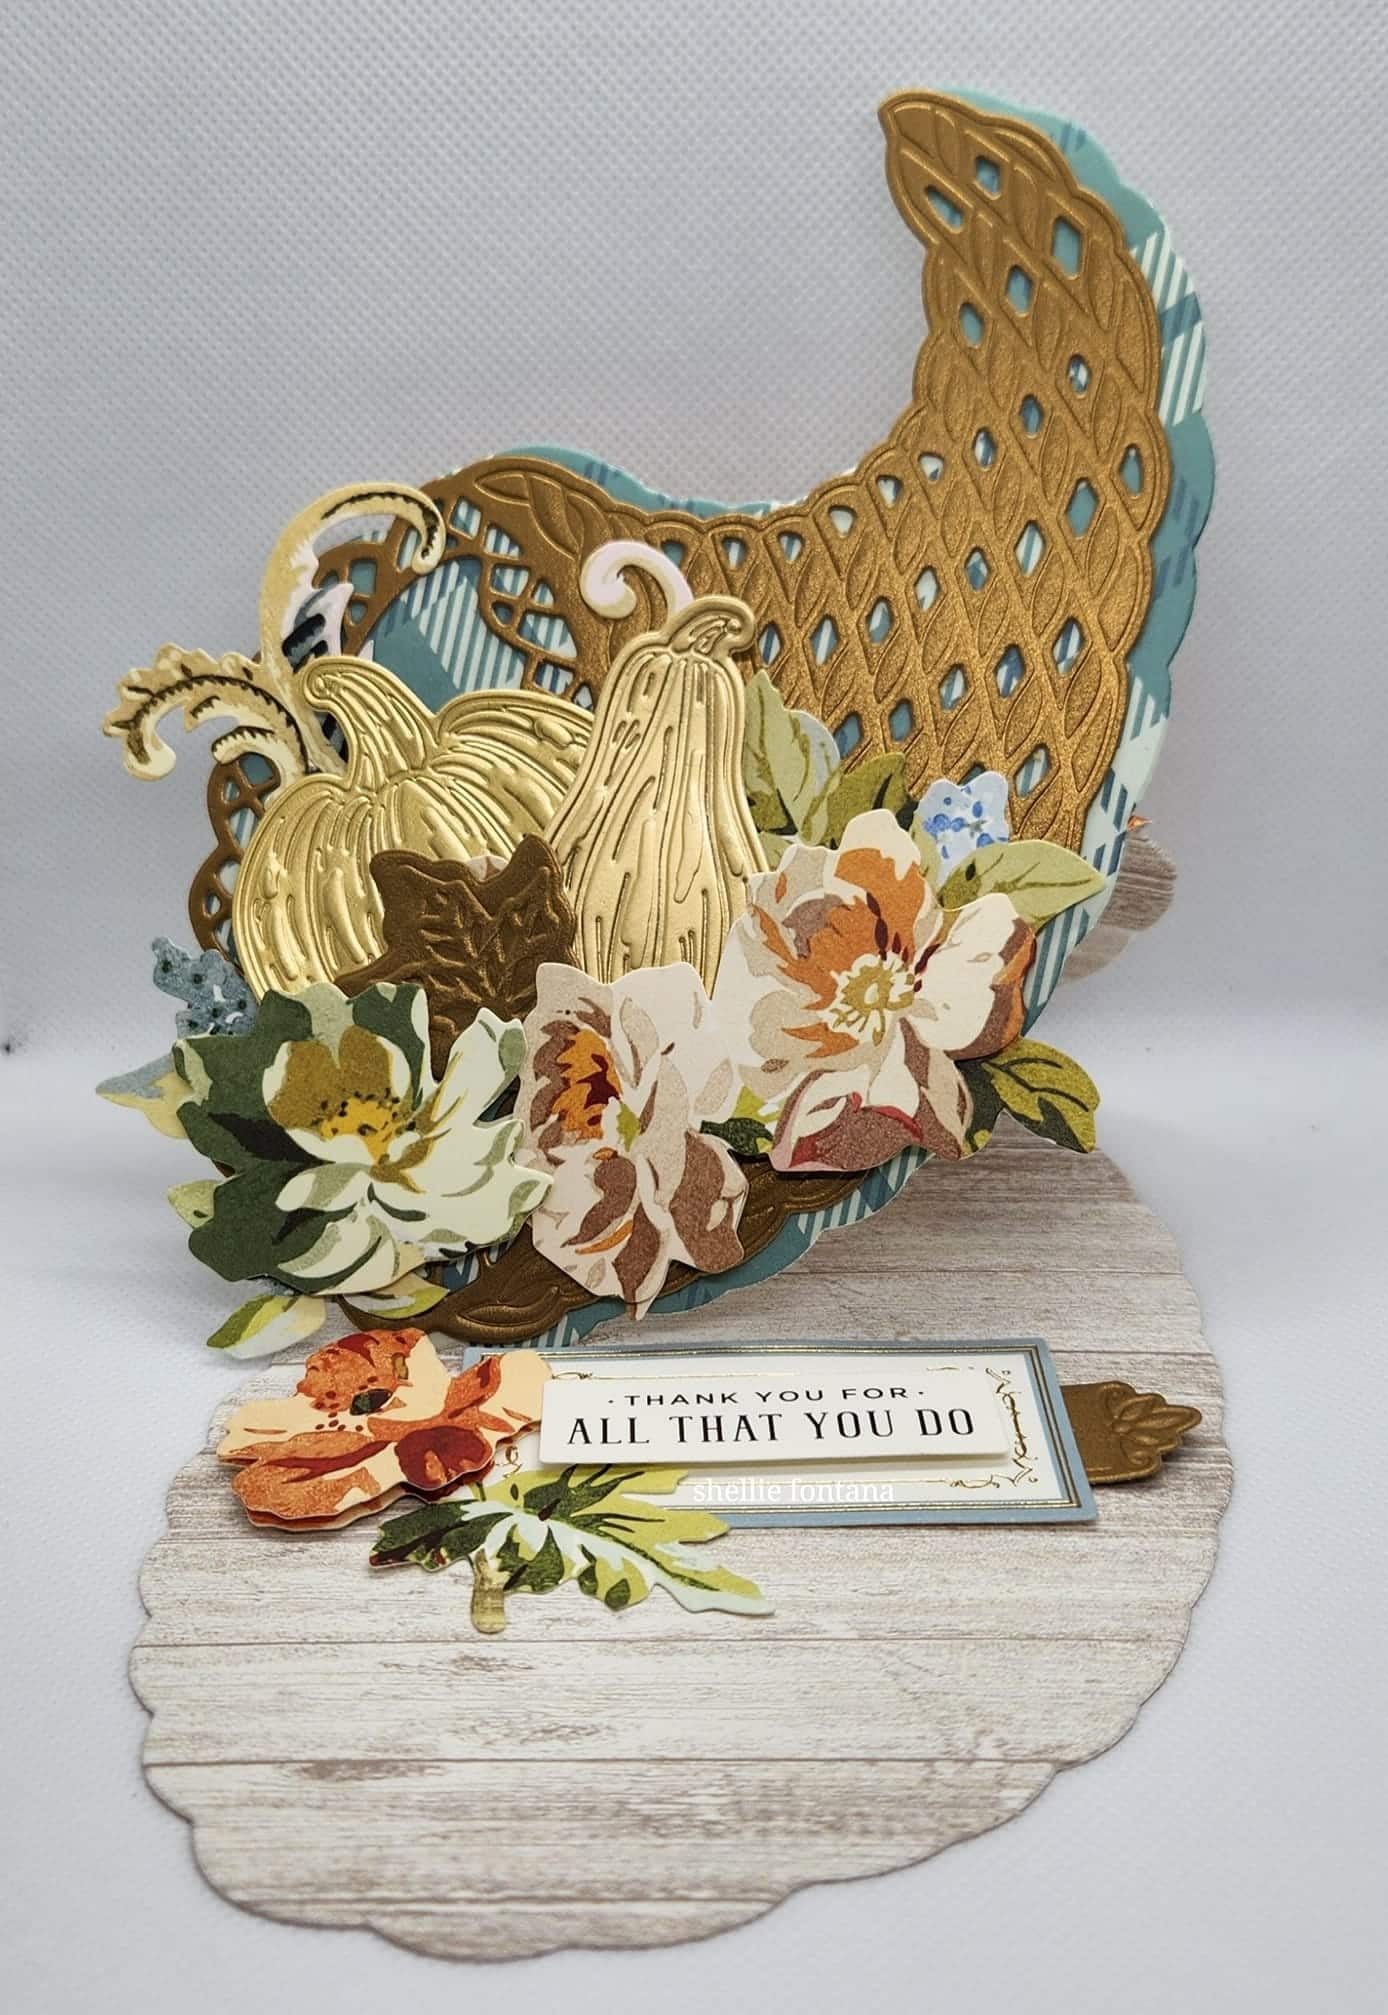 A pop up card with an image of a turkey and flowers.